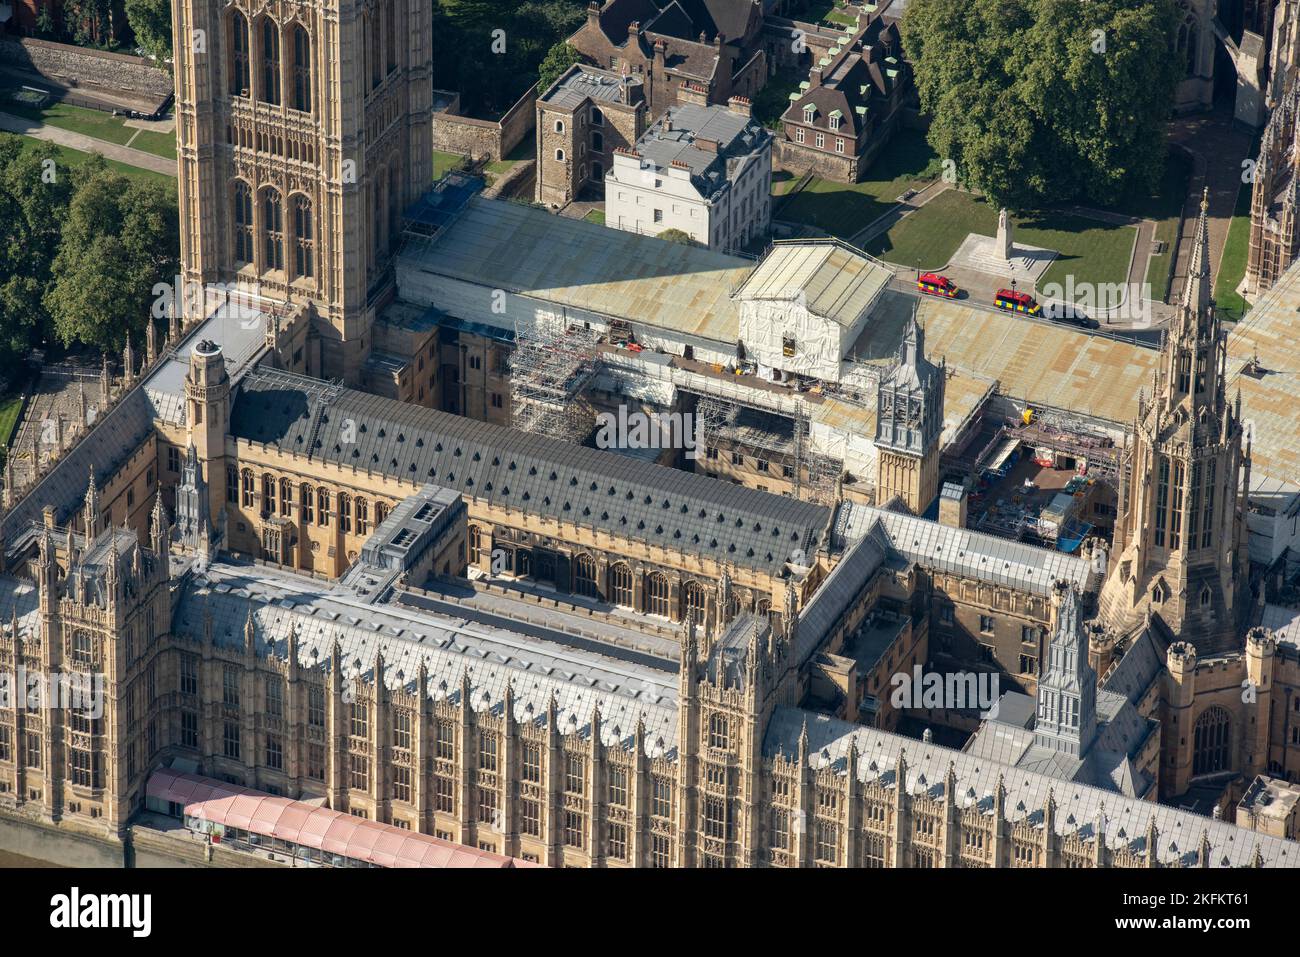 Renovation works at the Houses of Parliament, Westminster, Greater London Authority, 2021. Stock Photo